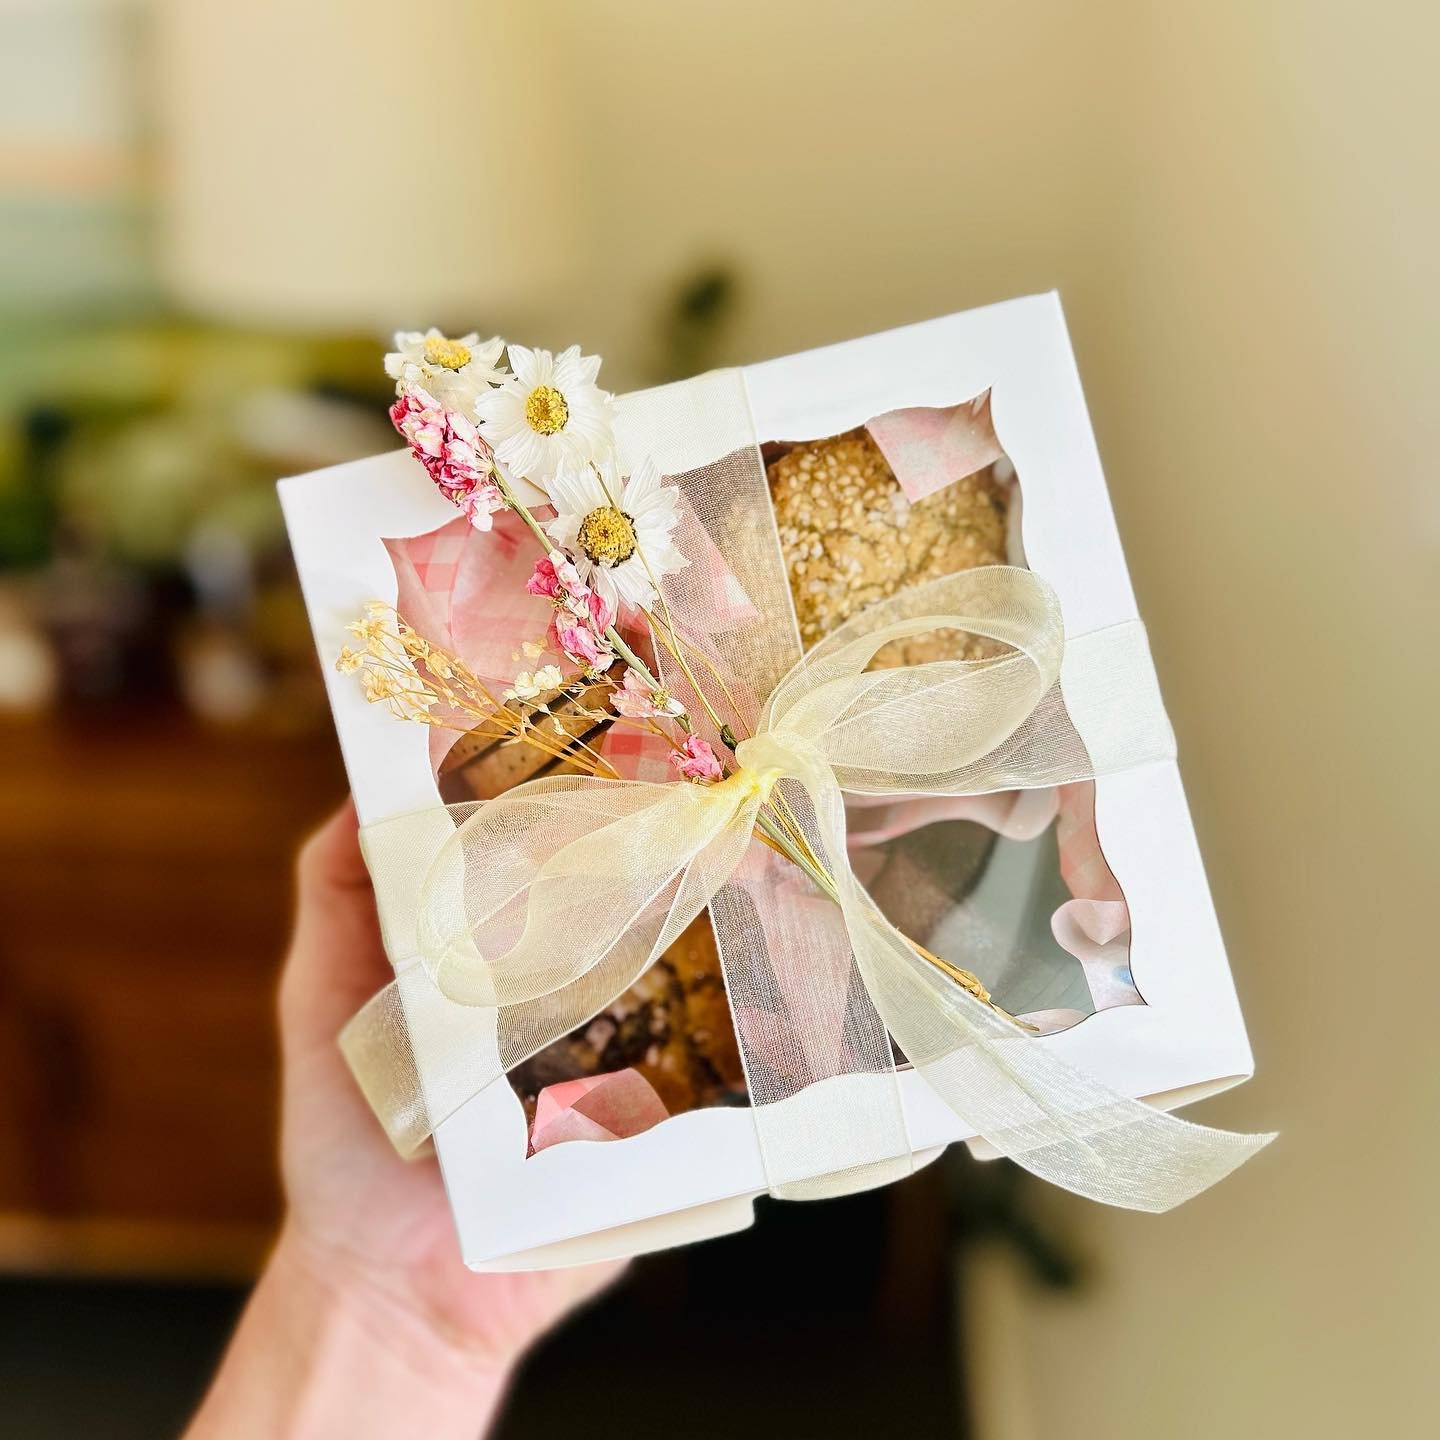 This Saturday! Cookie gift boxes, bento cakes, treats &amp; more 💛💛💛

Shop for the mom(s) in your life @underoneroofpetaluma I&rsquo;ll be joining more than 50 other Bay Area artisans &amp; businesses  and it&rsquo;s going to be so good! 

See ya 